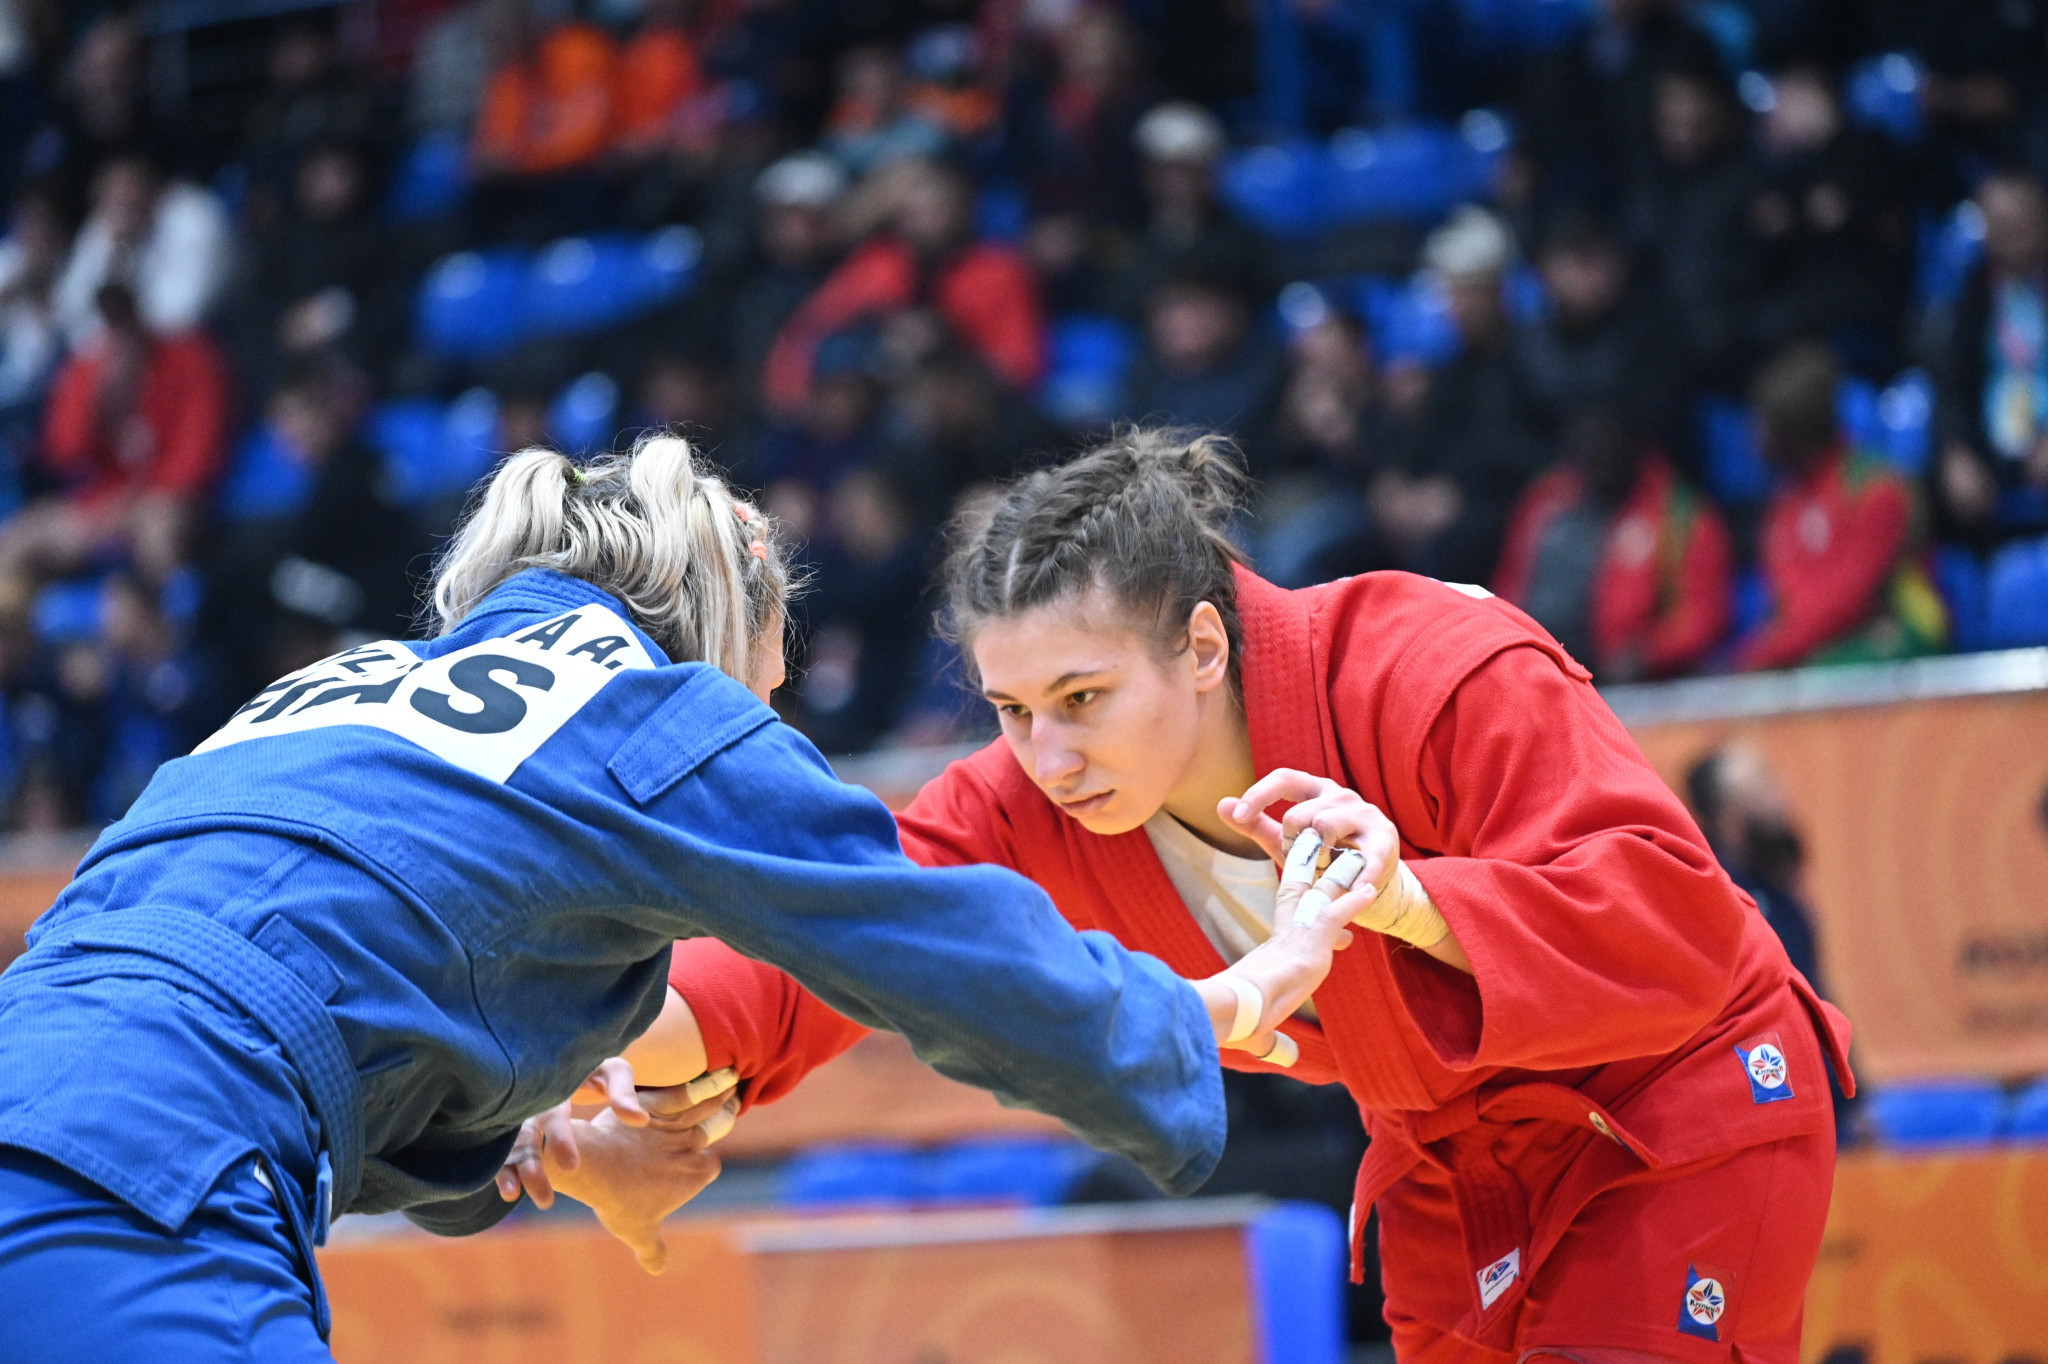 Neutral FIAS athletes finished top of the medals table at the 2022 World Sambo Championships ©FIAS